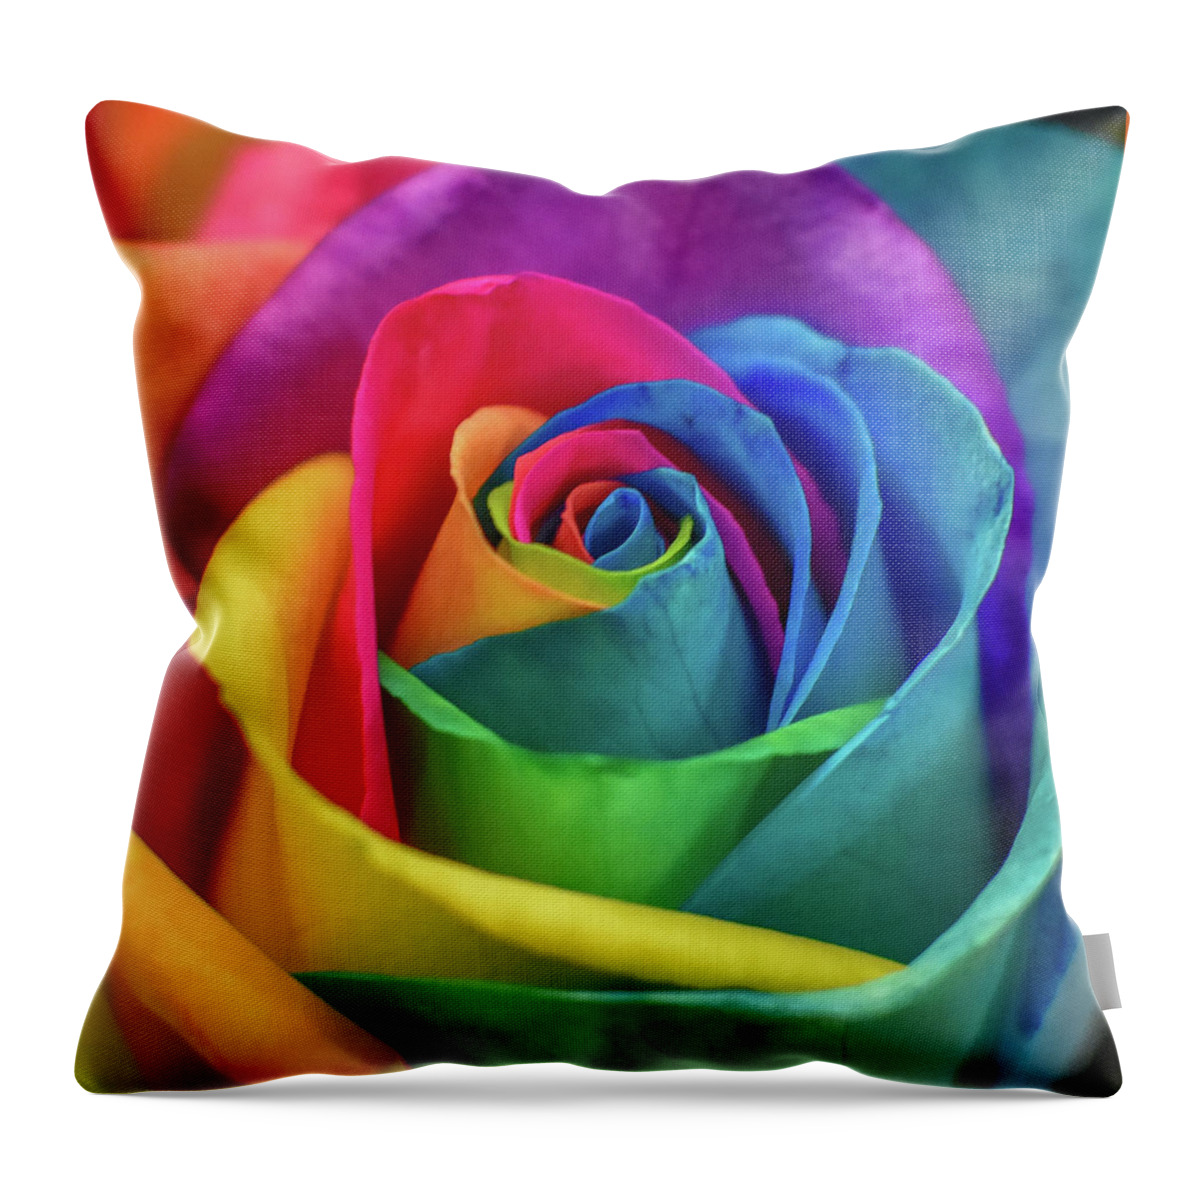 Rose Throw Pillow featuring the photograph Rainbow Rose by Michelle Wittensoldner